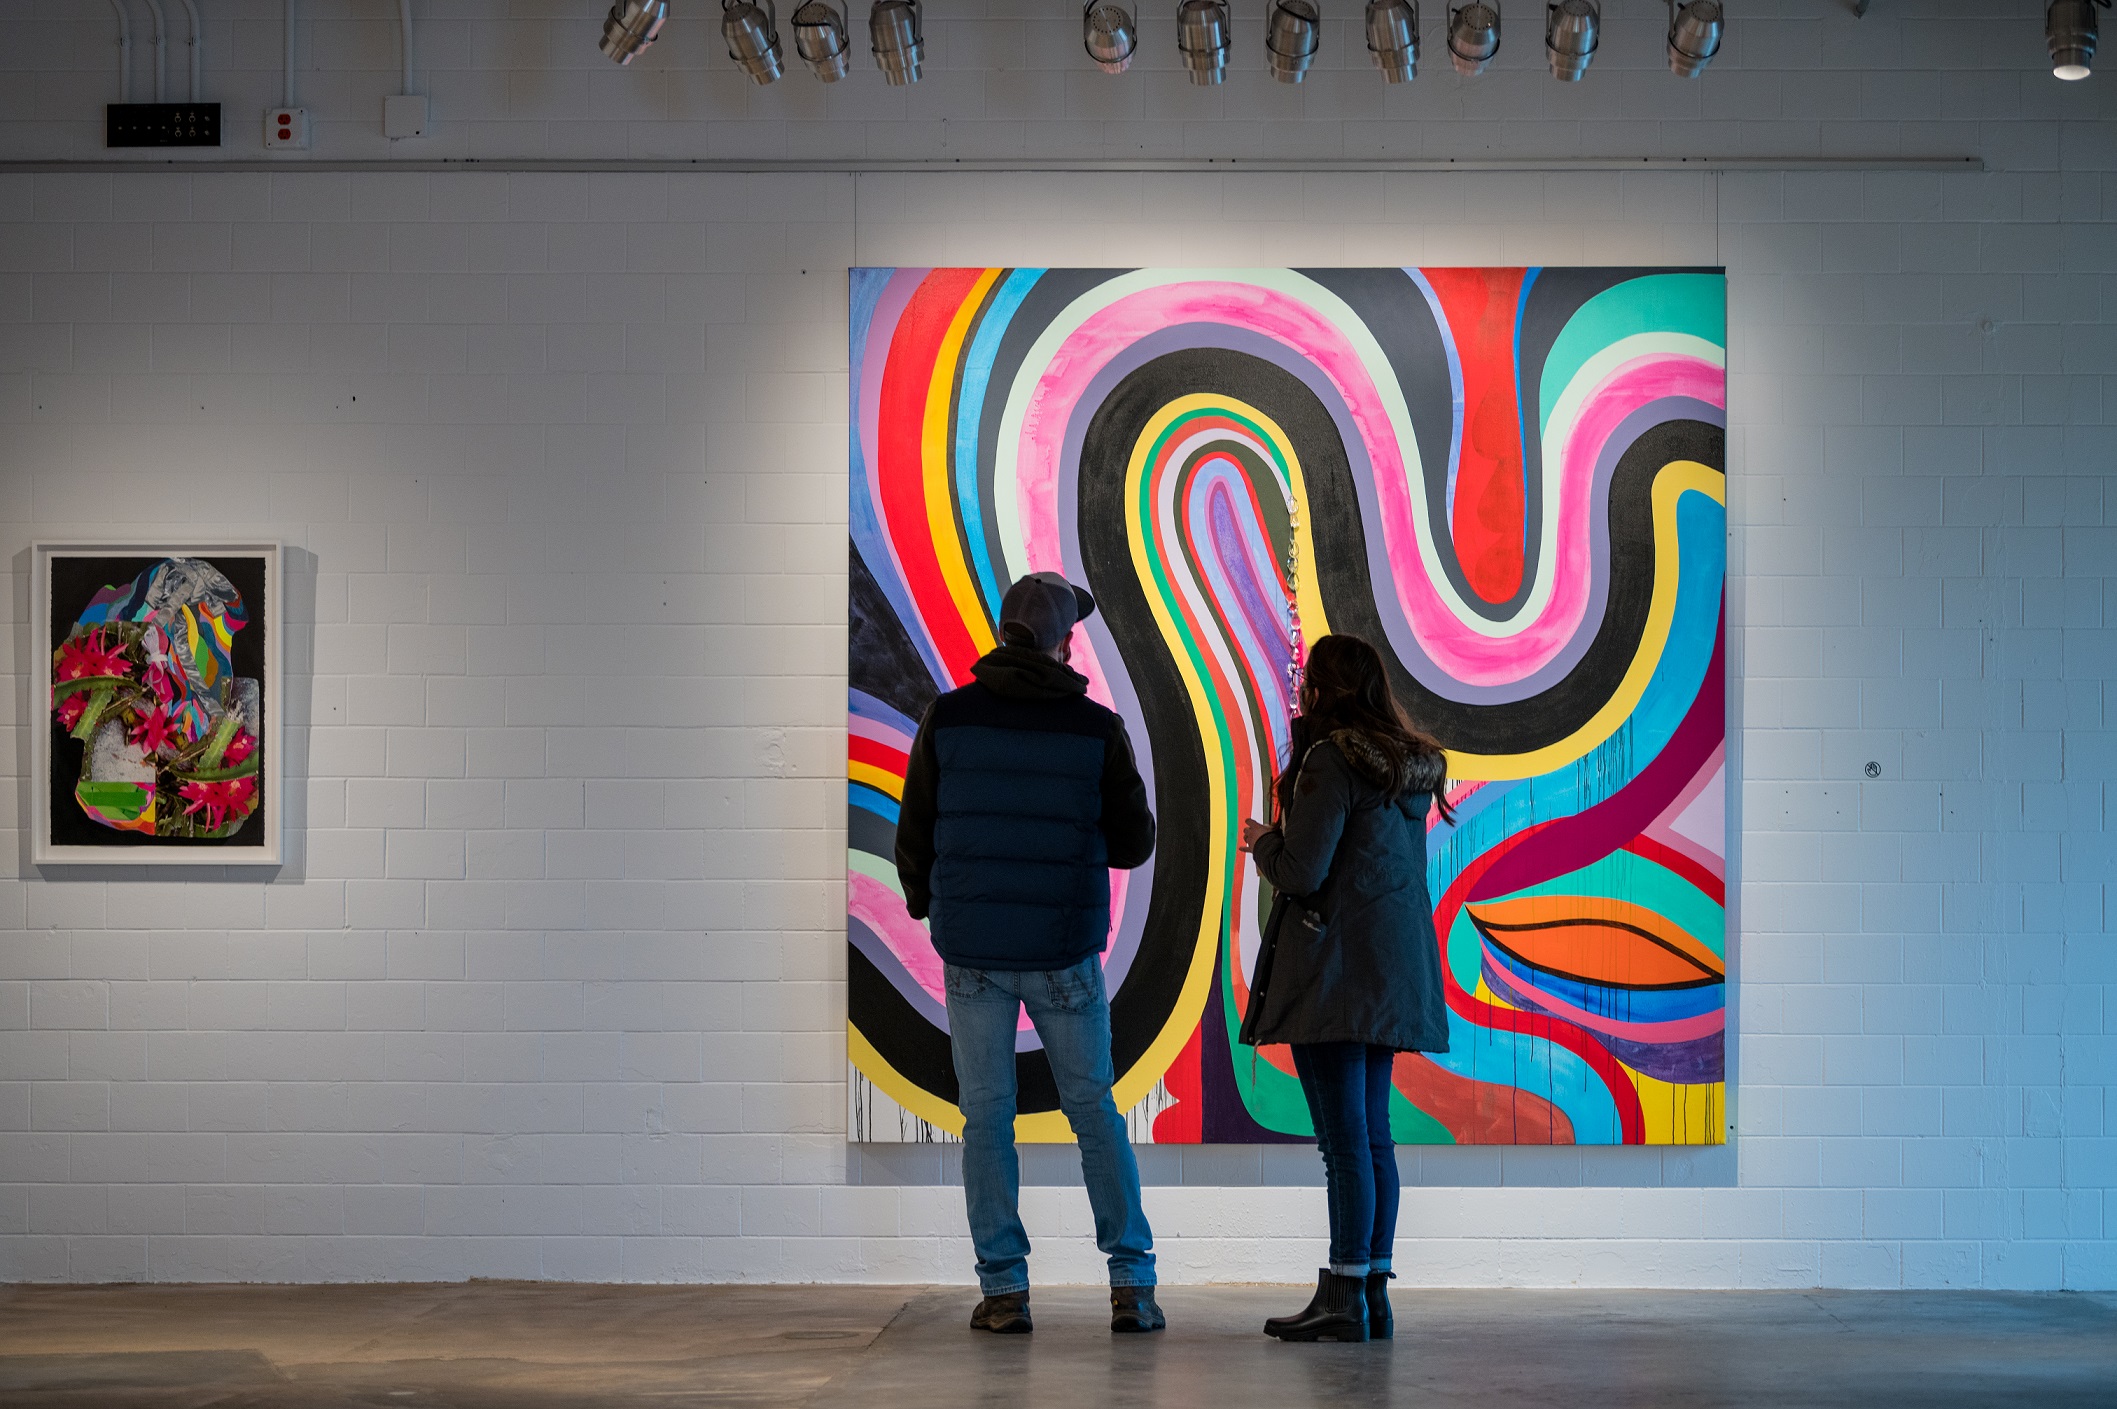 Two people looking at a multicolored abstract painting with large loops and swirls on the wall